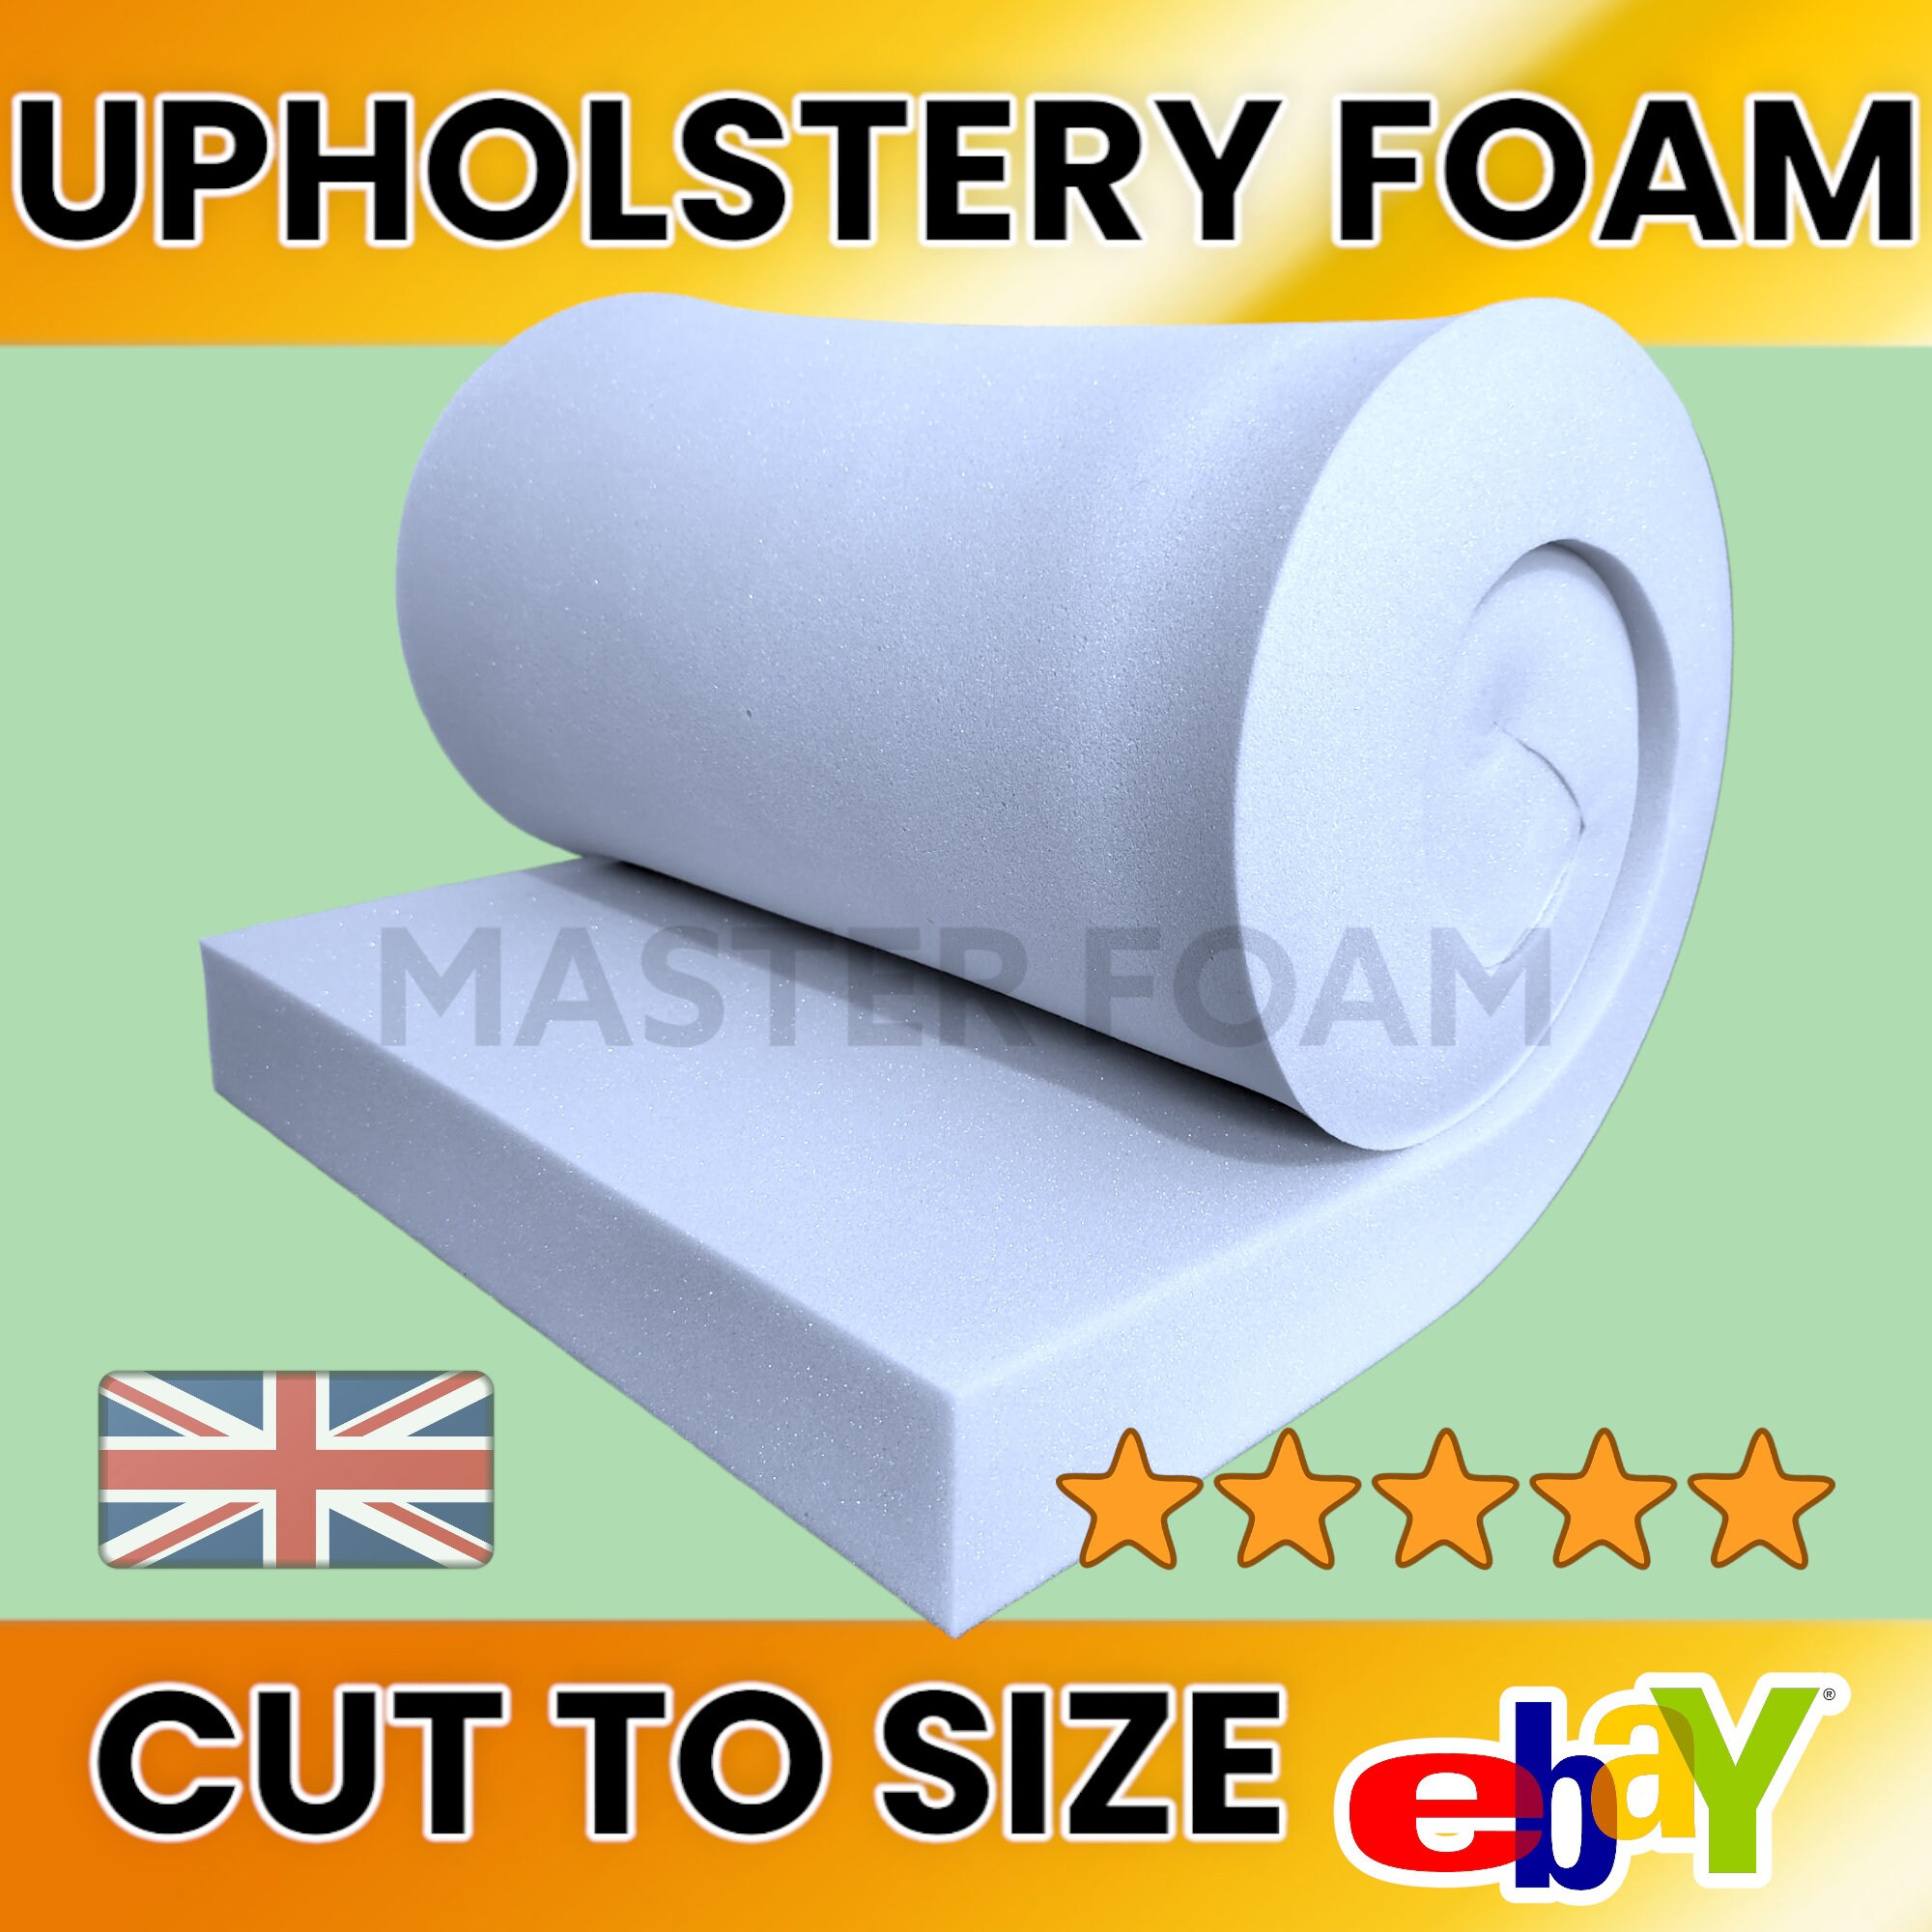 Upholstery Foam 1x24x72 - The Compleat Sculptor